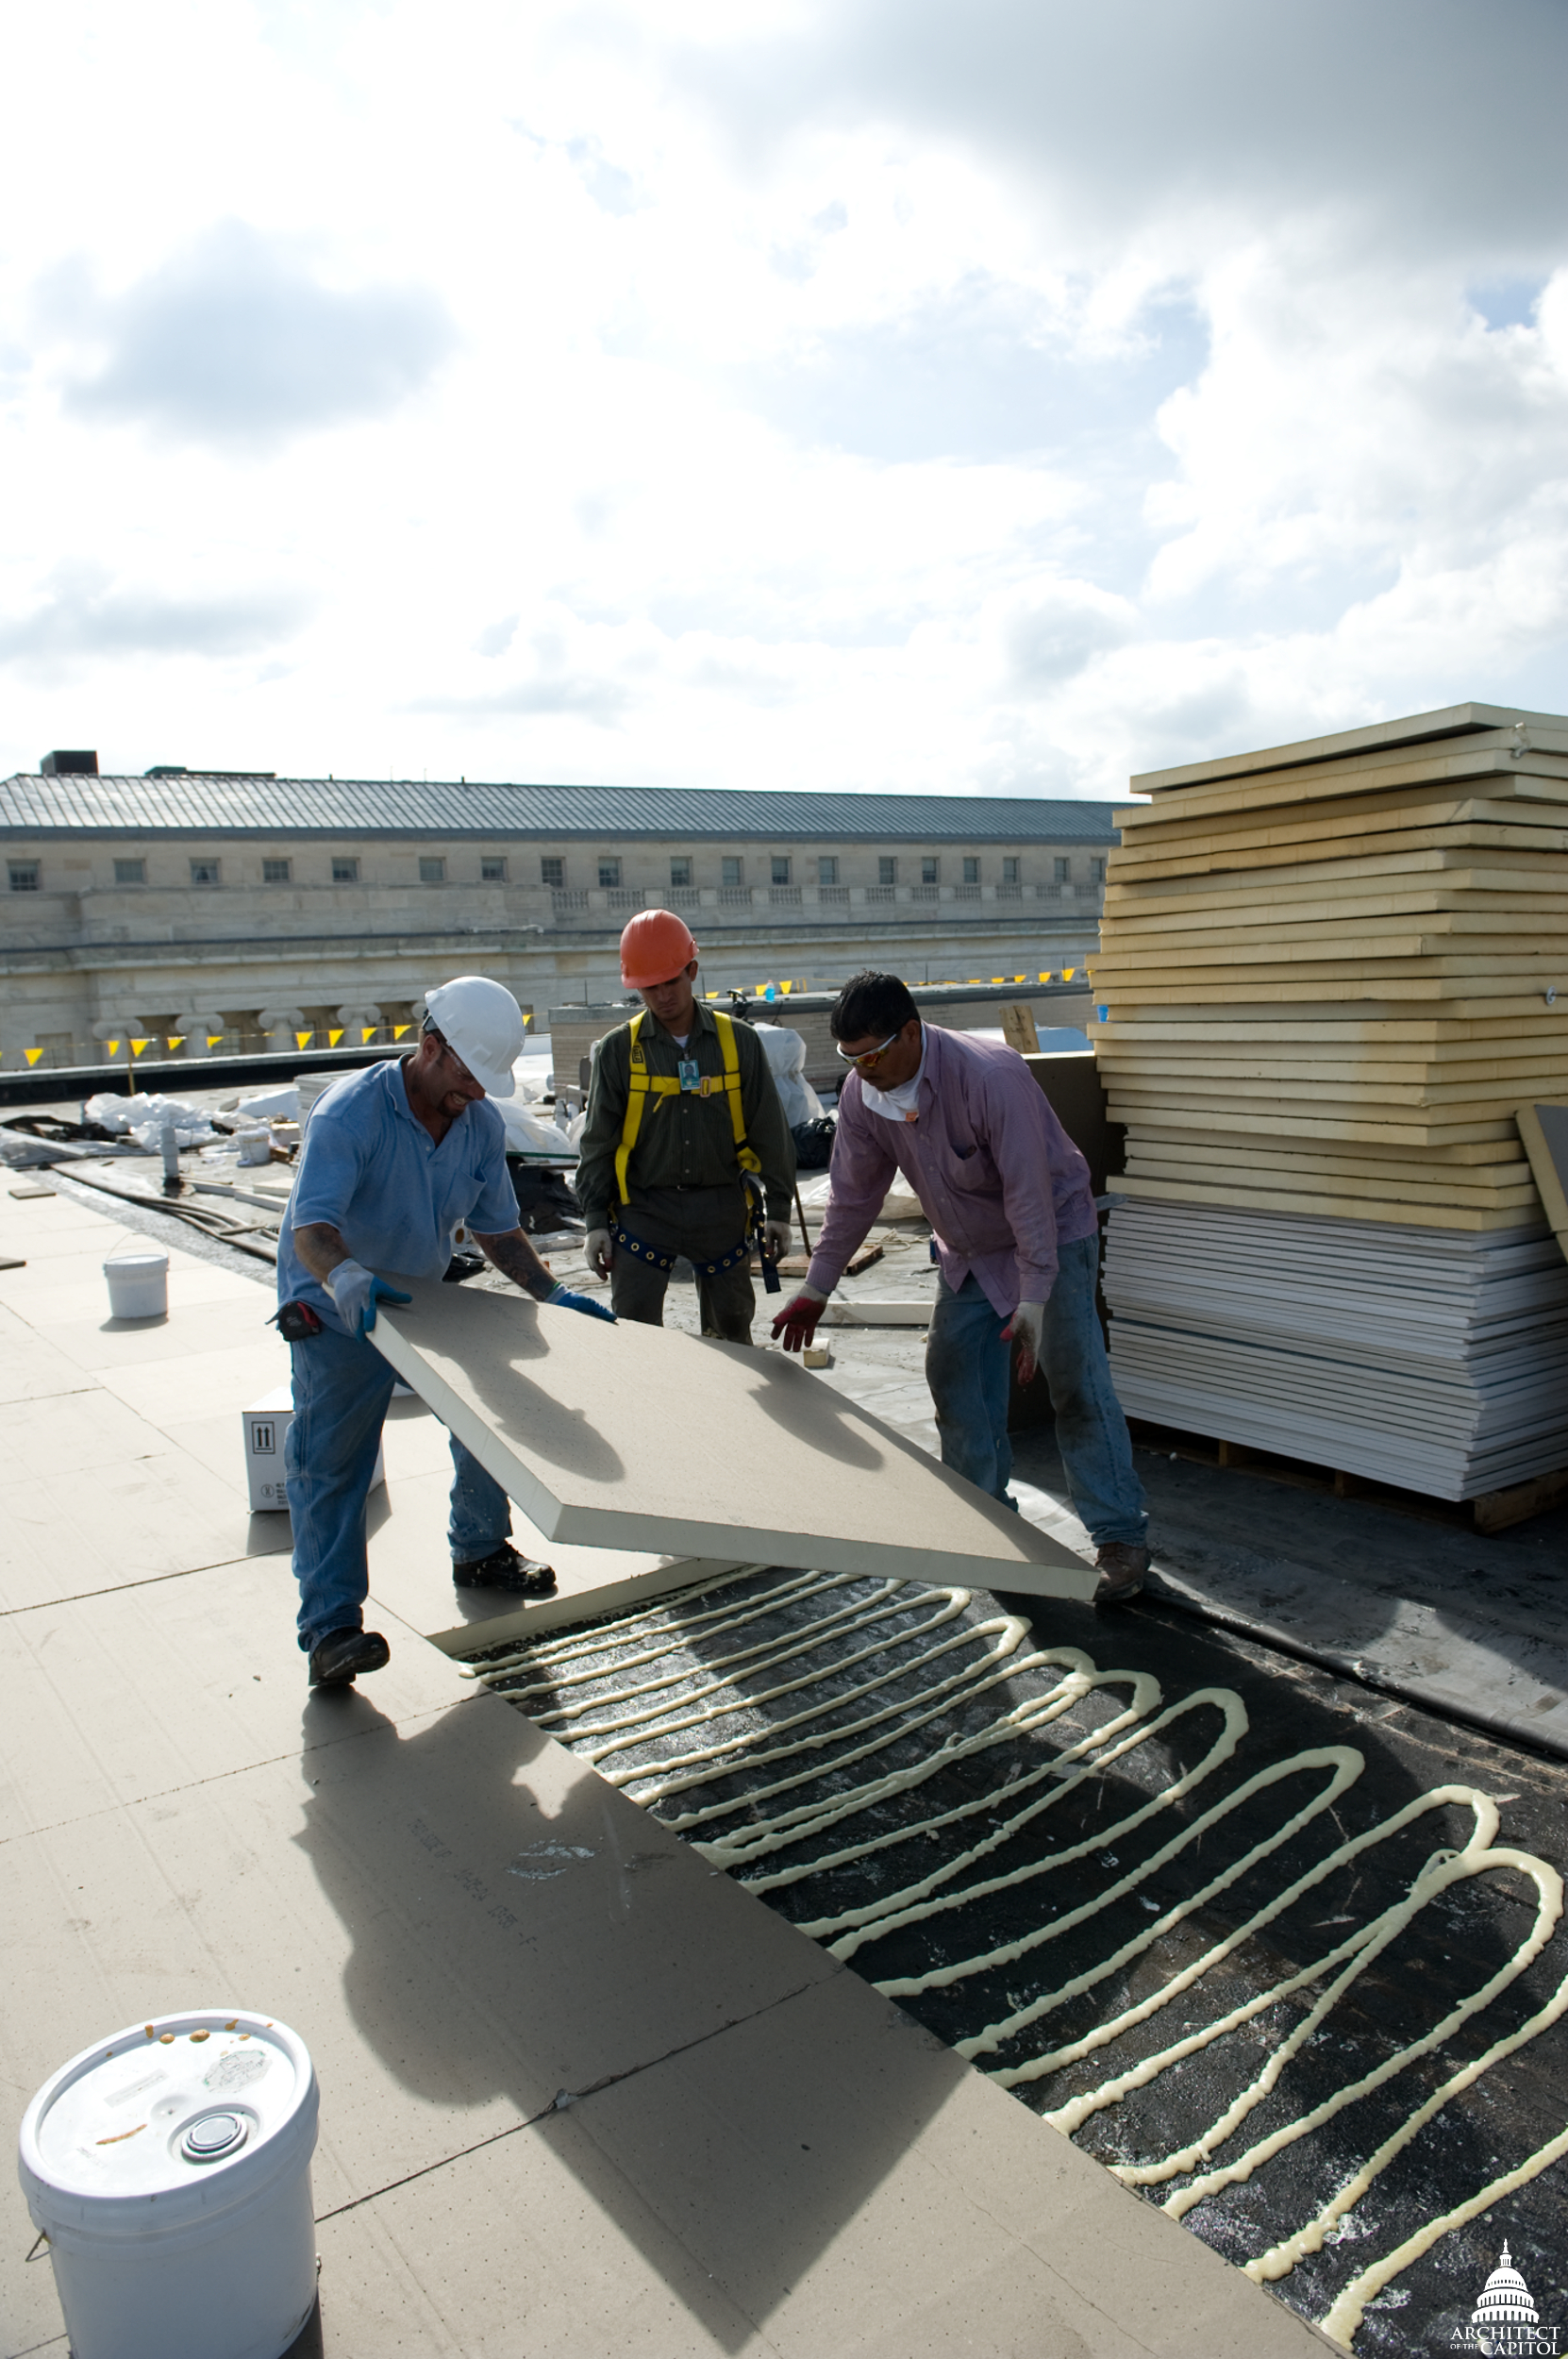 Modifying the existing system Rayburn House Office Building into a &quot;cool roof.&quot;